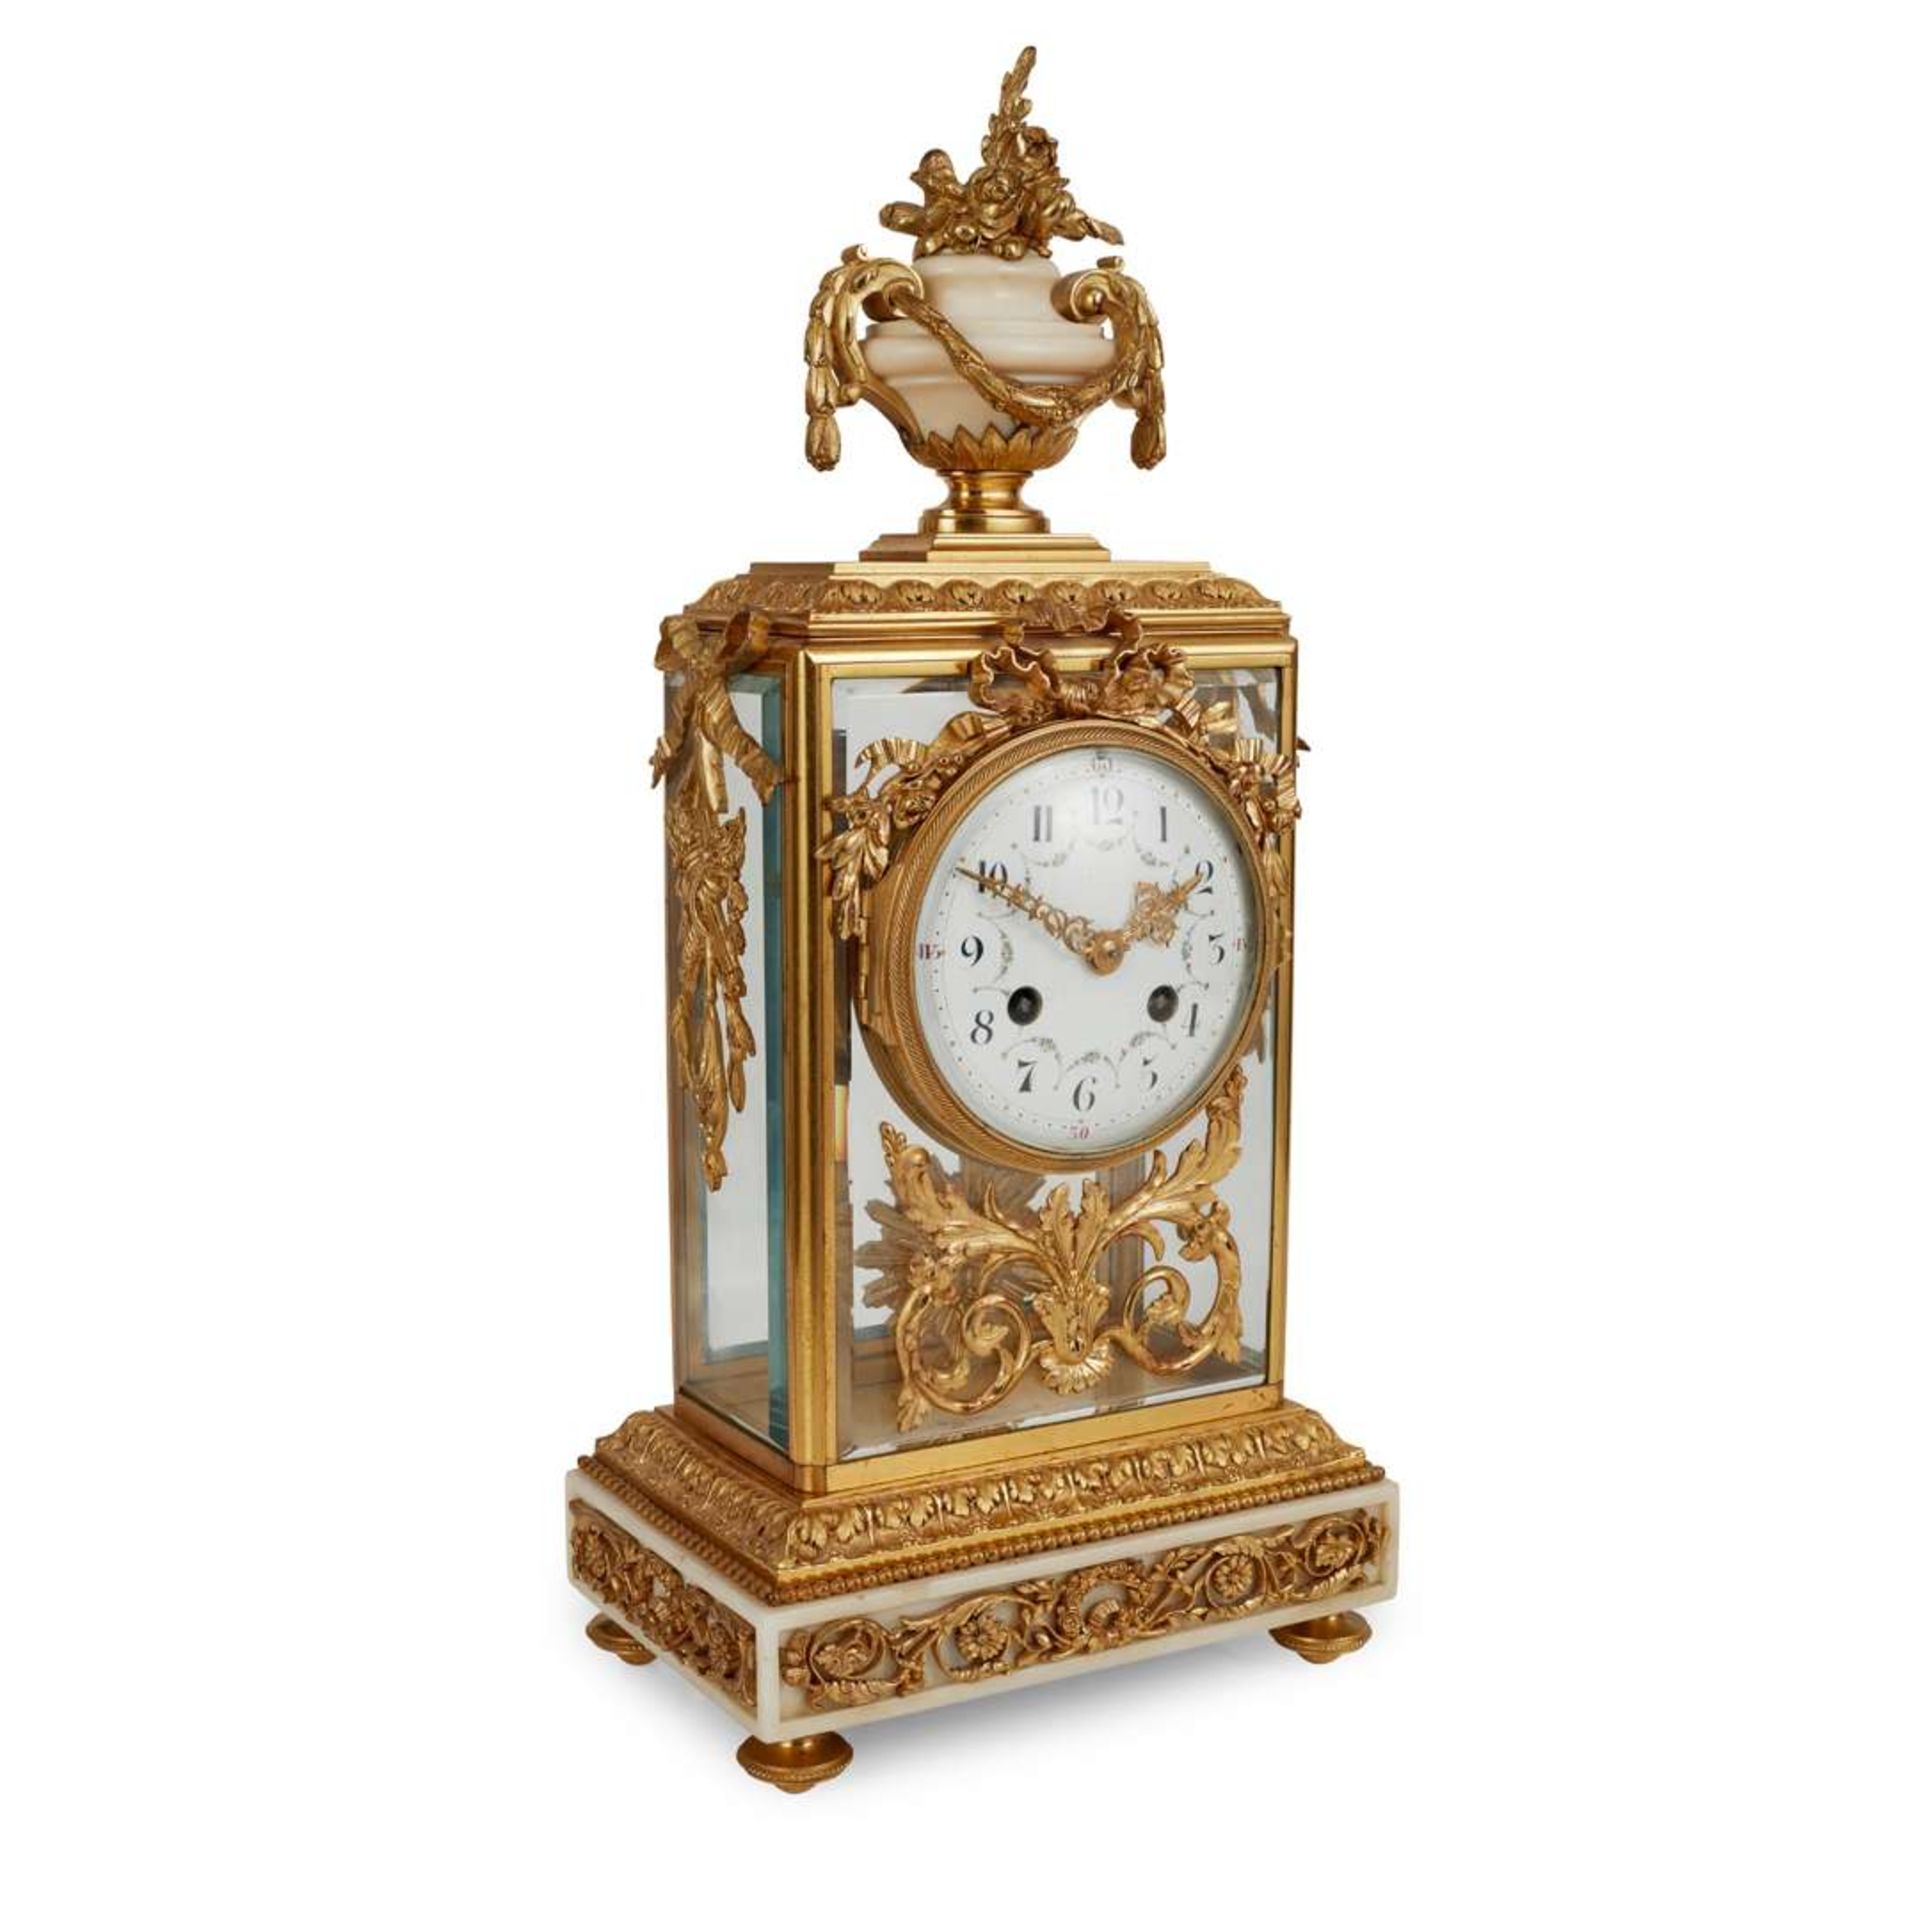 FRENCH WHITE MARBLE AND GILT BRONZE FOUR GLASS MANTEL CLOCK - Image 2 of 2